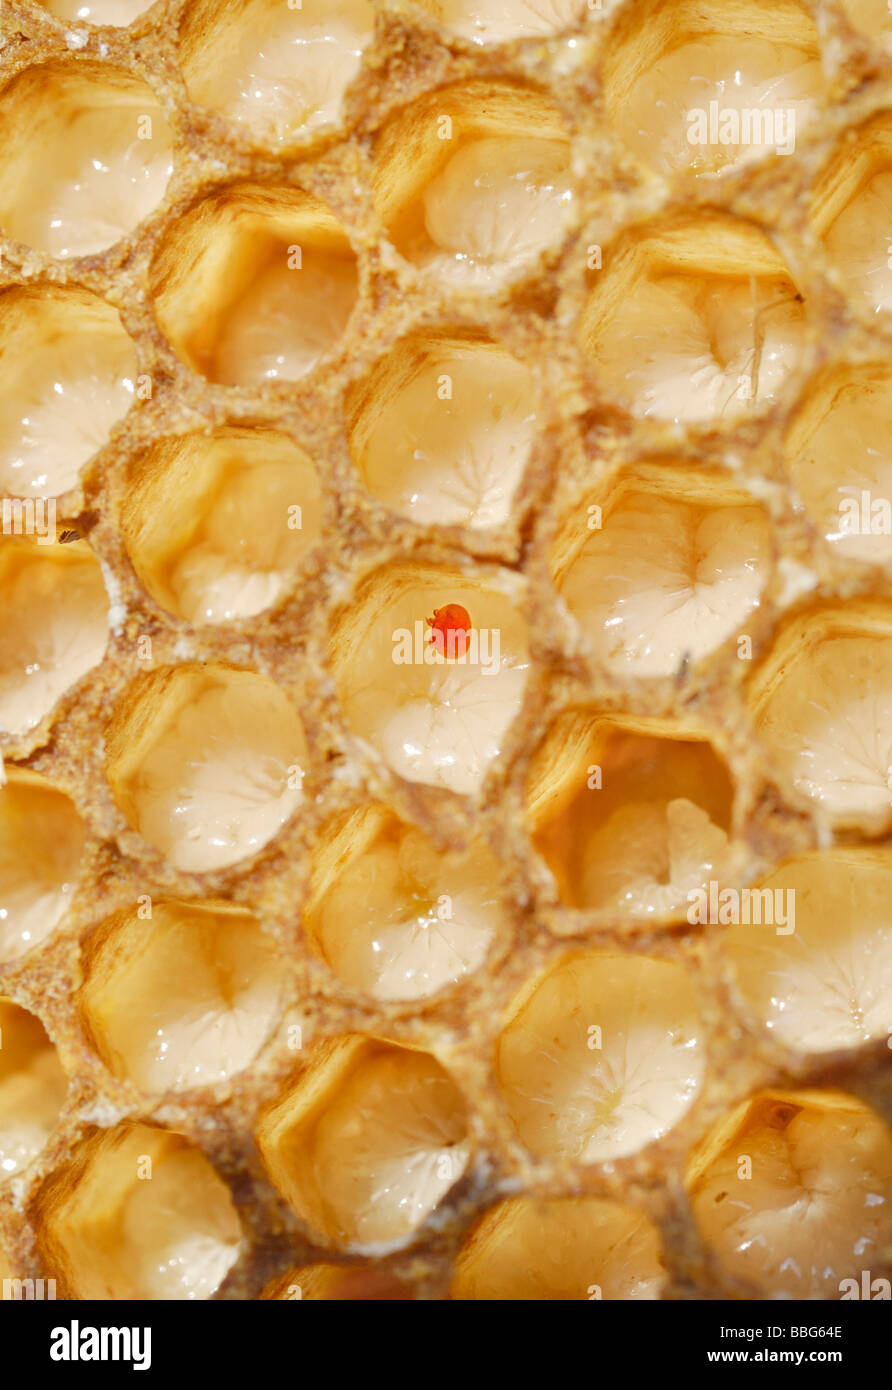 Varroa Mite (Varroa destructor or jacobsoni), a parasite in an unsealed bee brood comb with larvae of drone Bees (Apis mellifer Stock Photo